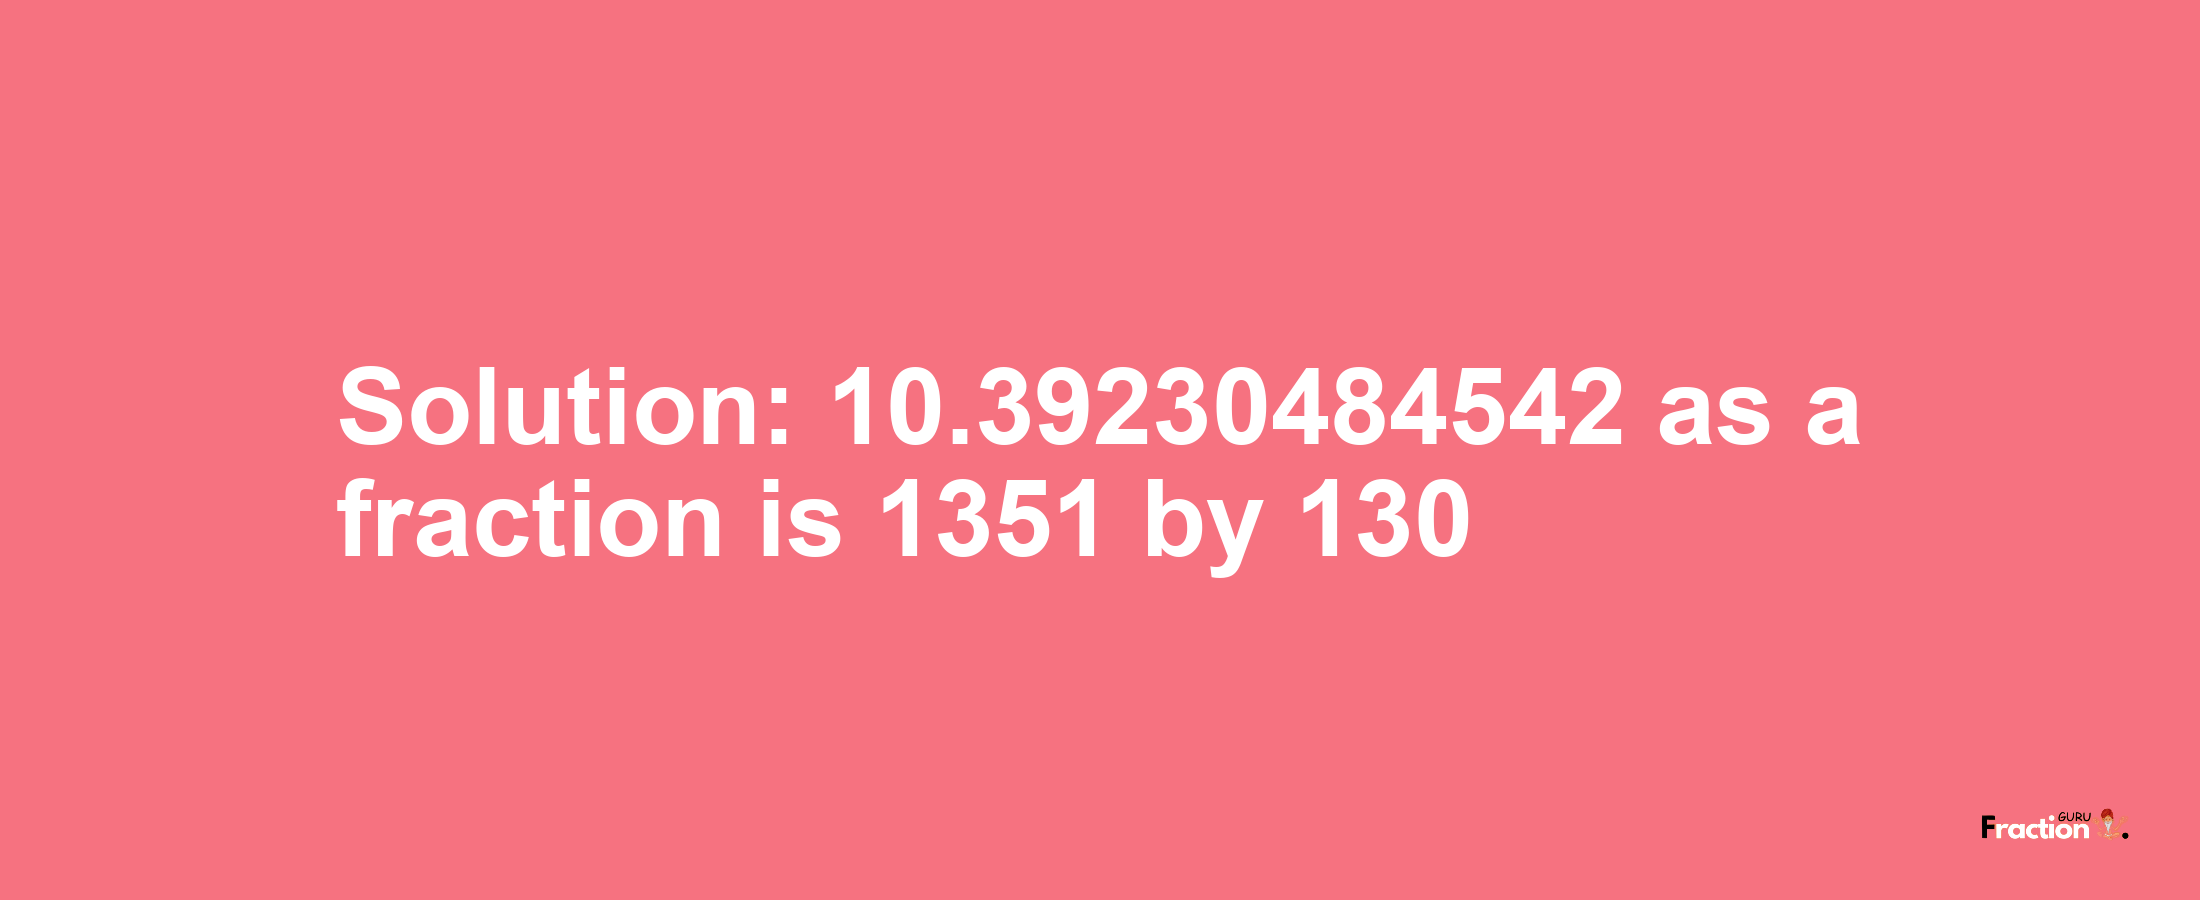 Solution:10.39230484542 as a fraction is 1351/130